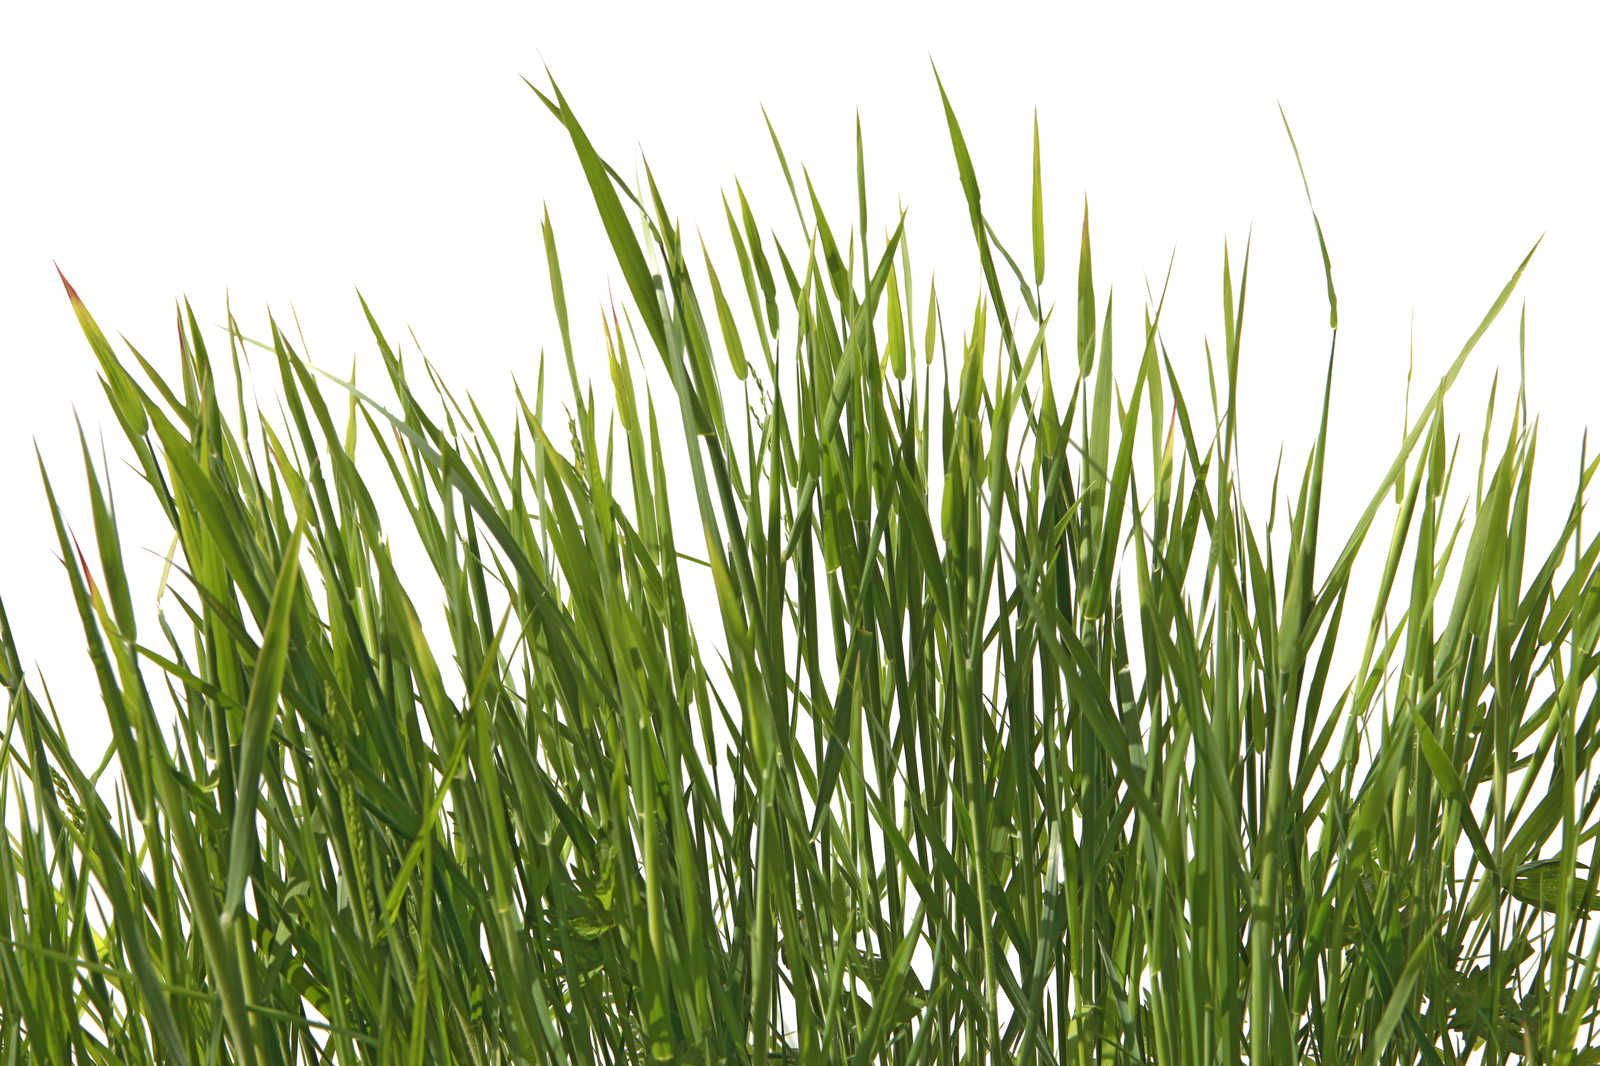             Canvas painting Grasses detail with white background - 1,20 m x 0,80 m
        